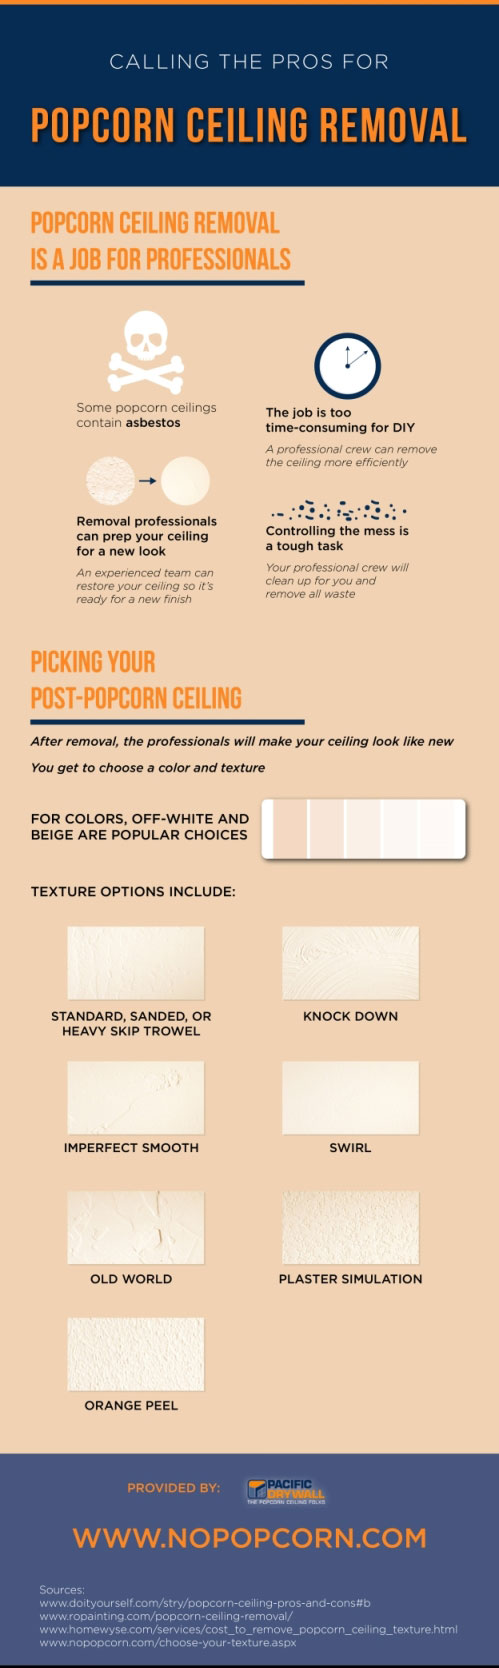 popcorn ceiling removal process